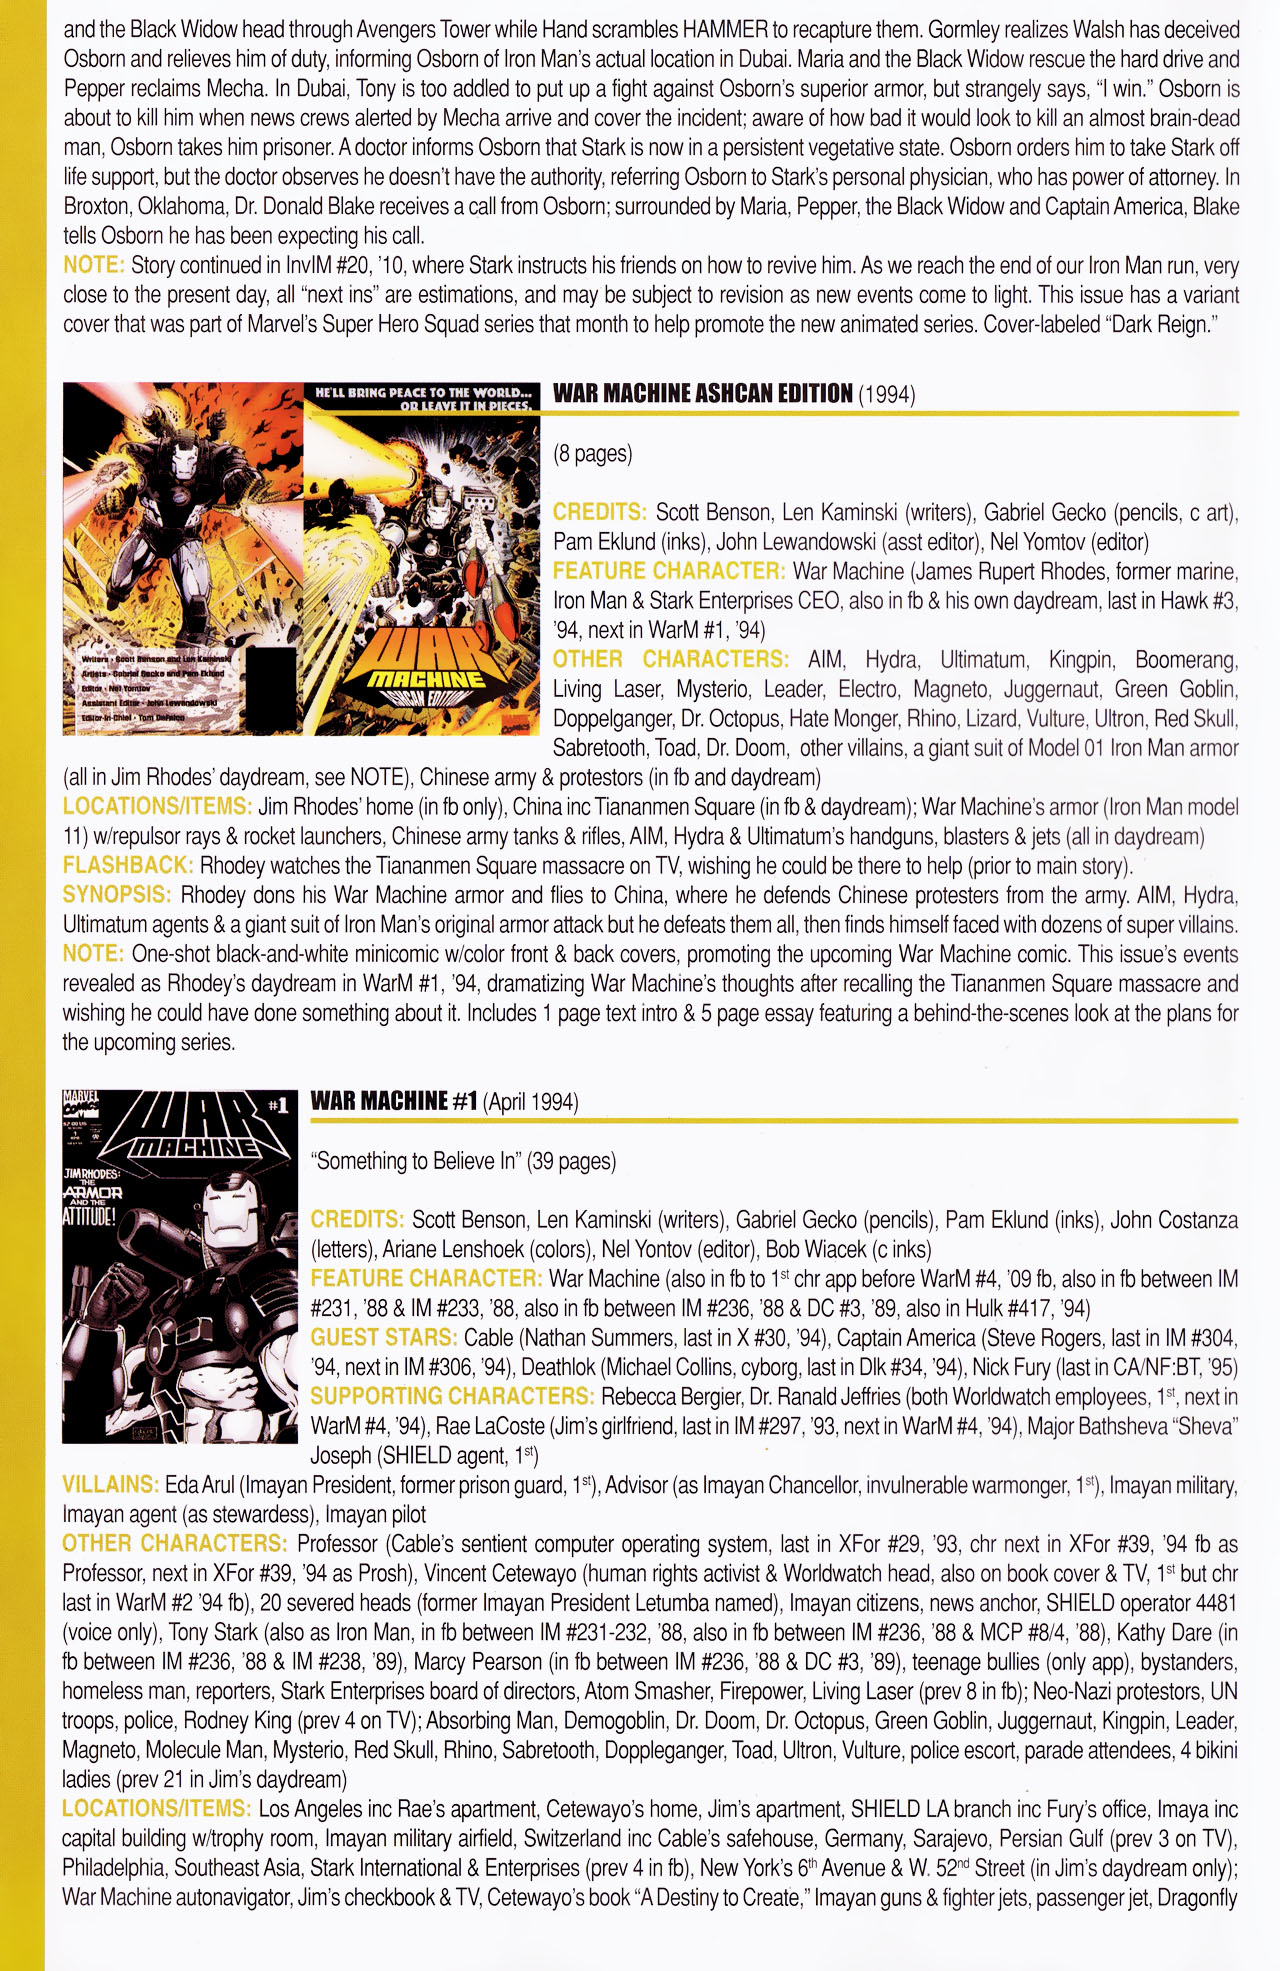 Read online Official Index to the Marvel Universe comic -  Issue #13 - 38